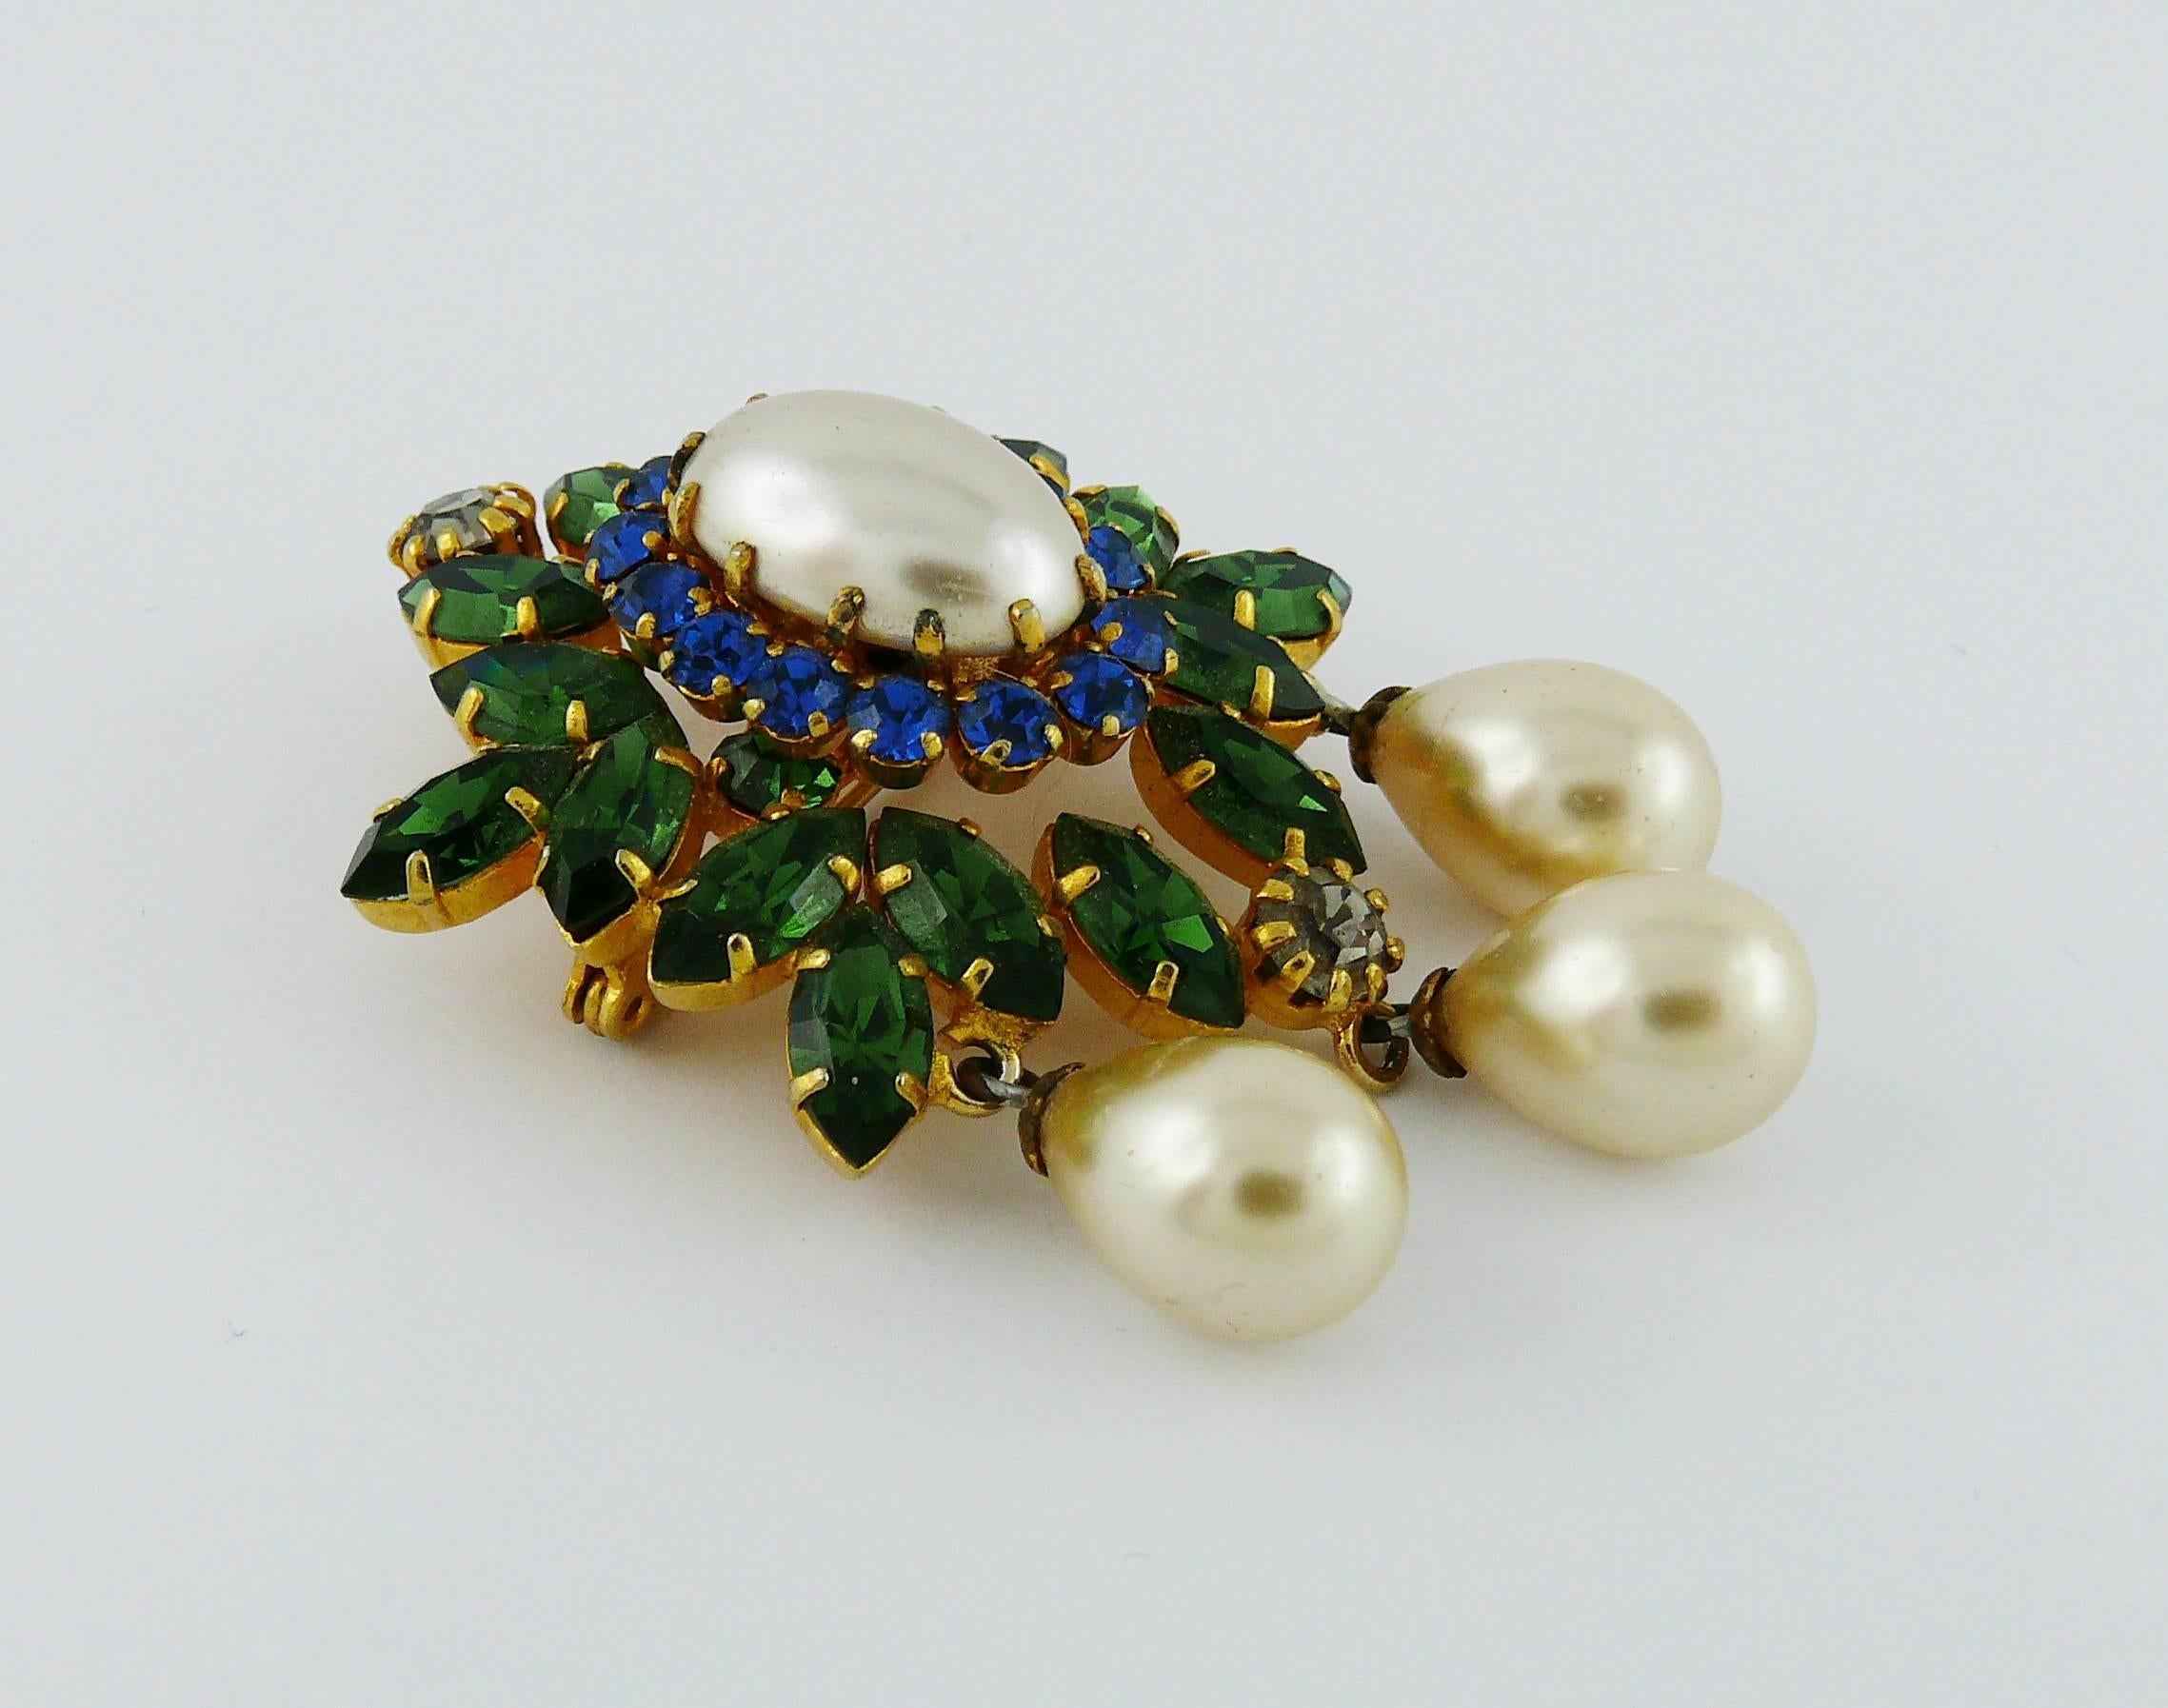 Vintage brooch featuring green and blue crystals with glass faux pearls.

Unmarked.

Indicative measurements : total height approx. 6 cm (2.36 inches) / width approx 3.4 cm (1.34 inches).

JEWELRY CONDITION CHART
- New or never worn : item is in